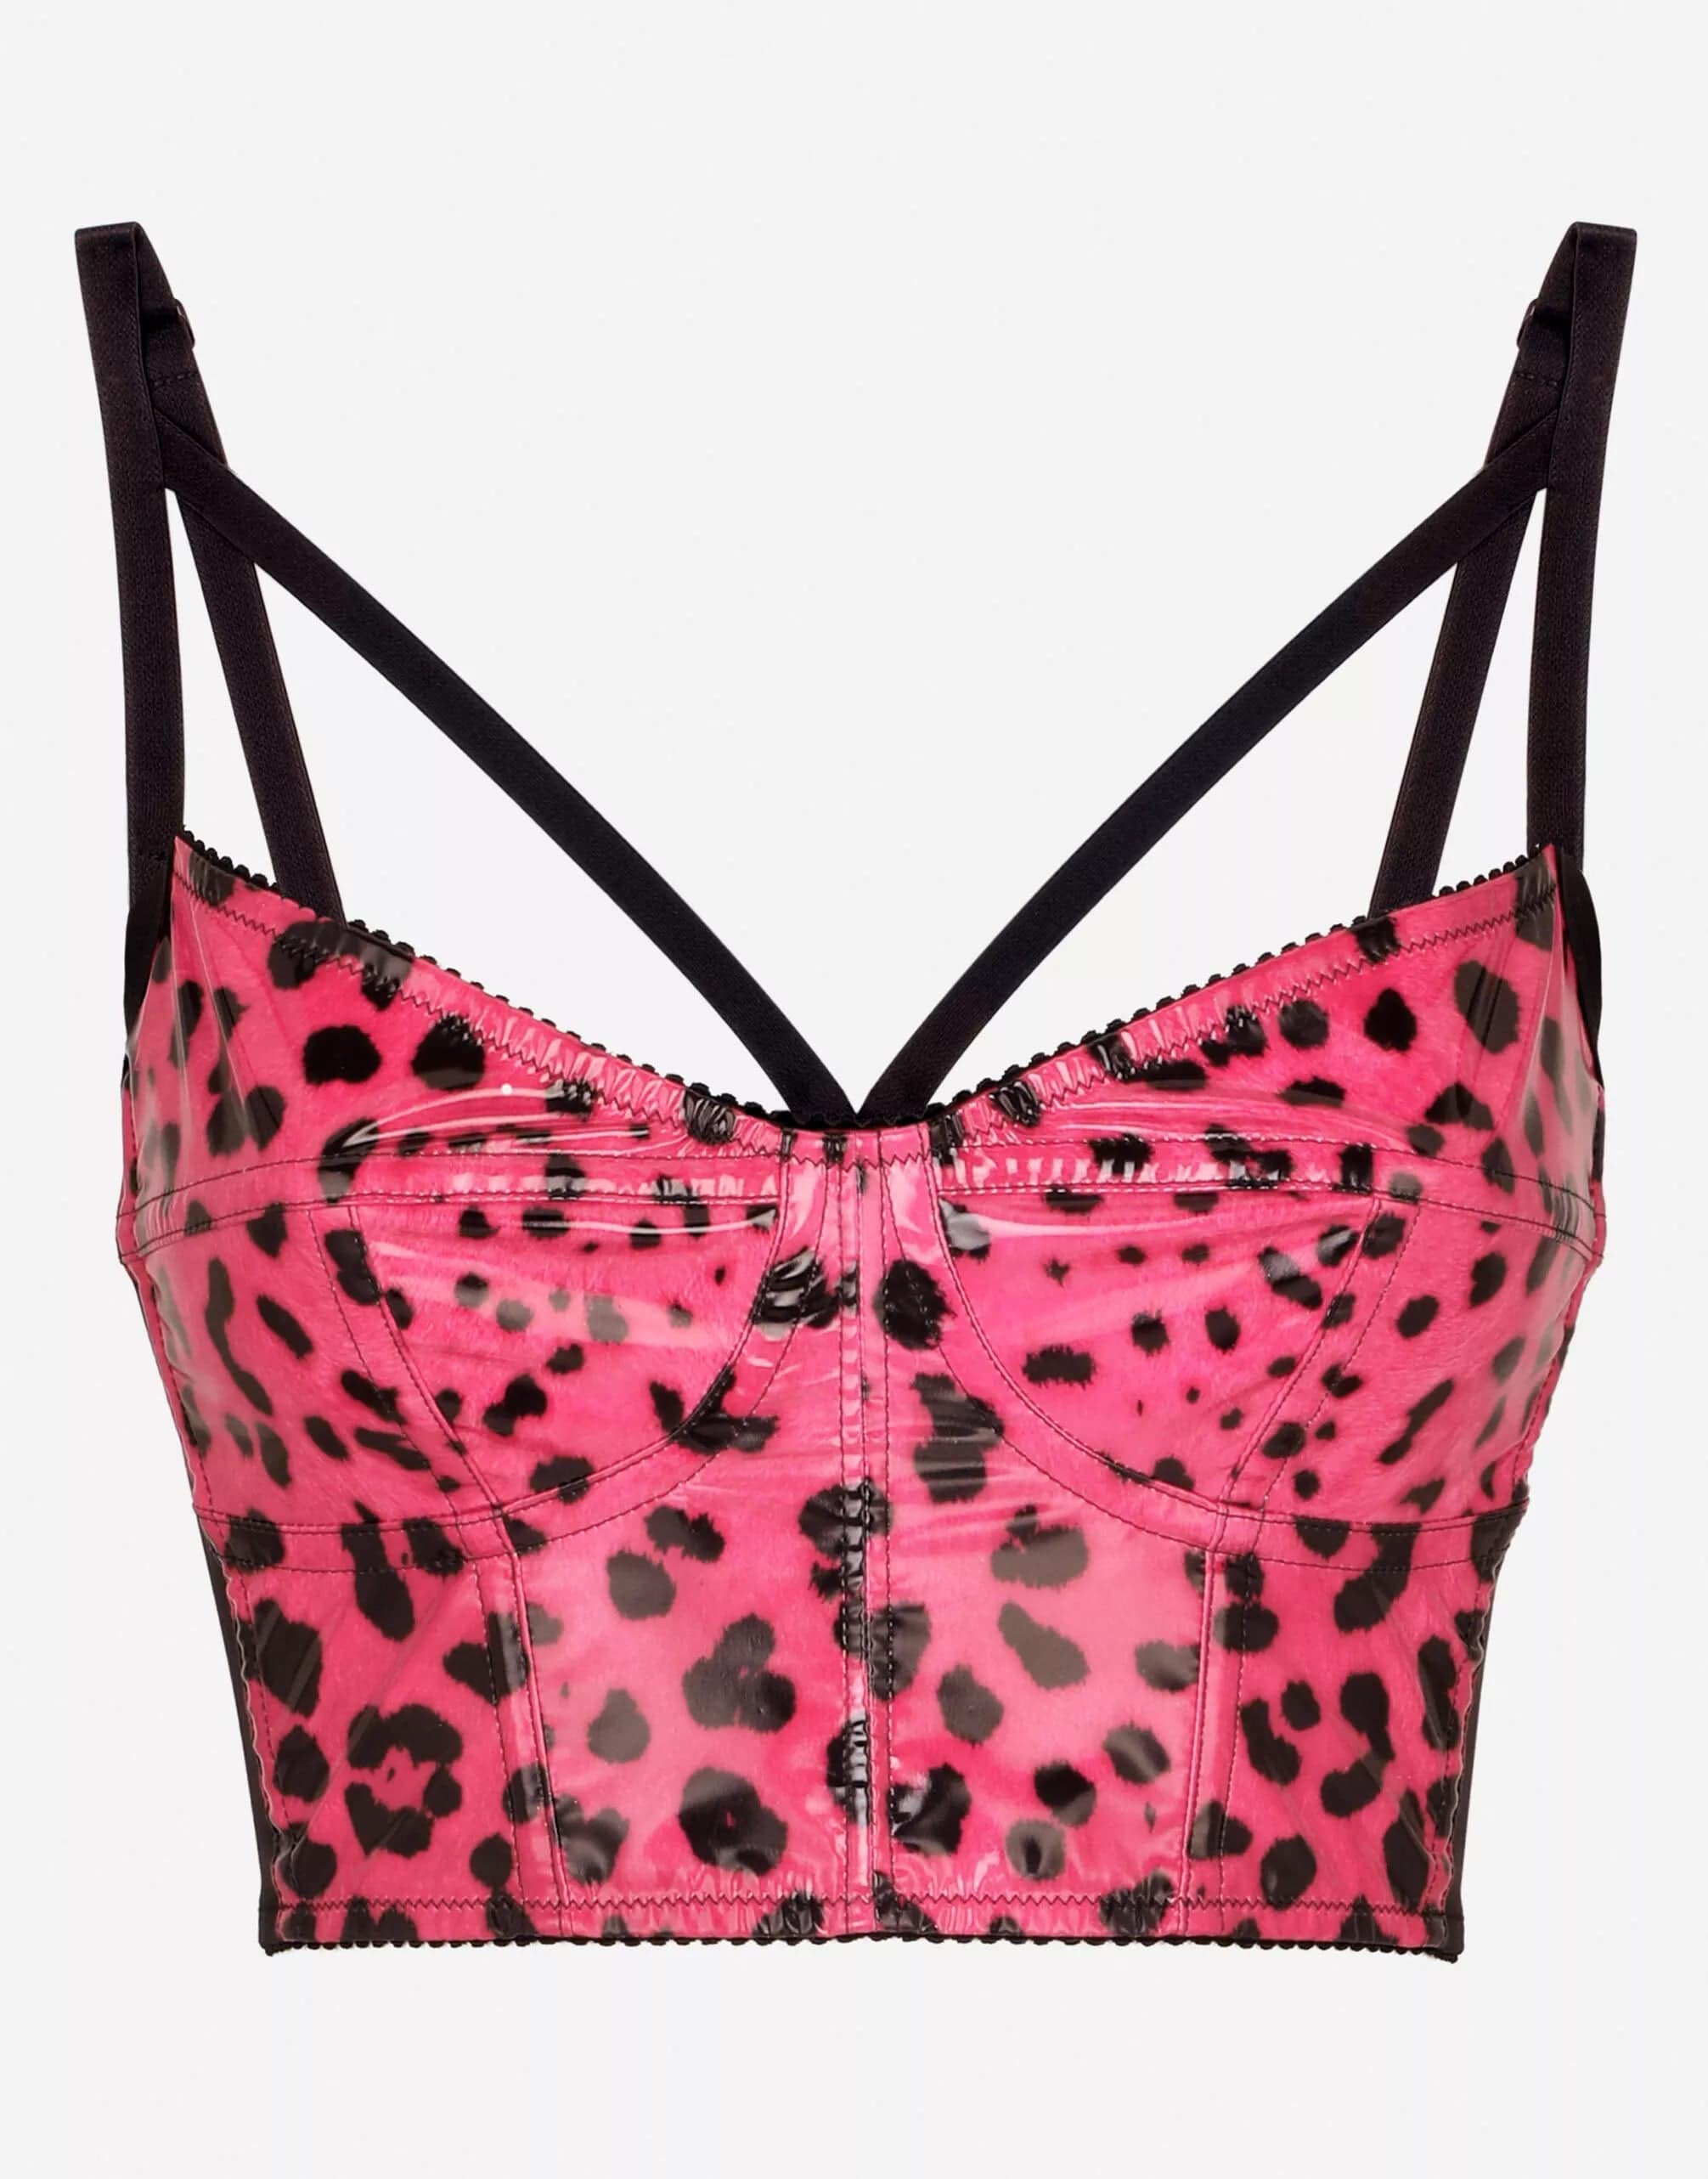 Dolce & Gabbana Foiled Satin Bustier With Neon Leopard Print